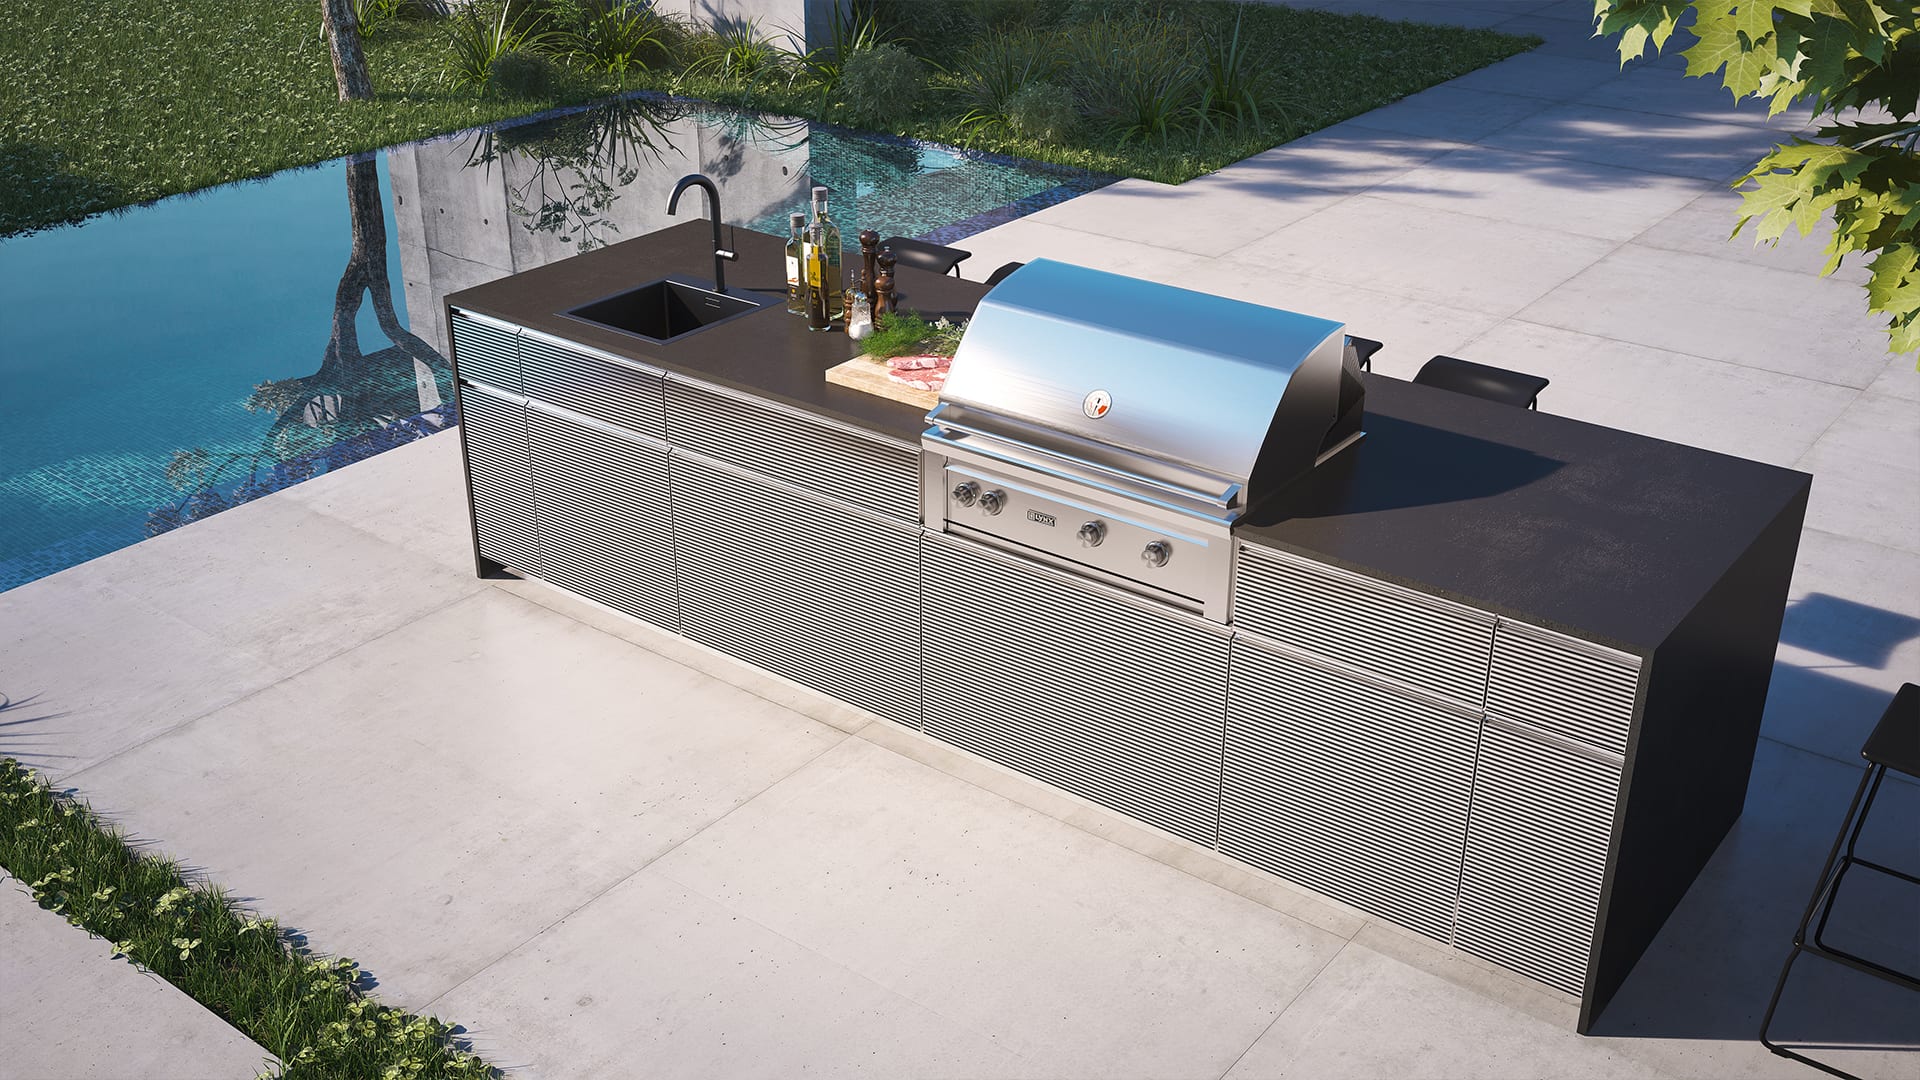 Maayan-Golan_Architectural-Visualization_product-visualization_Kliens-kitchens_ Outdoor-kitchen-Outopia_03